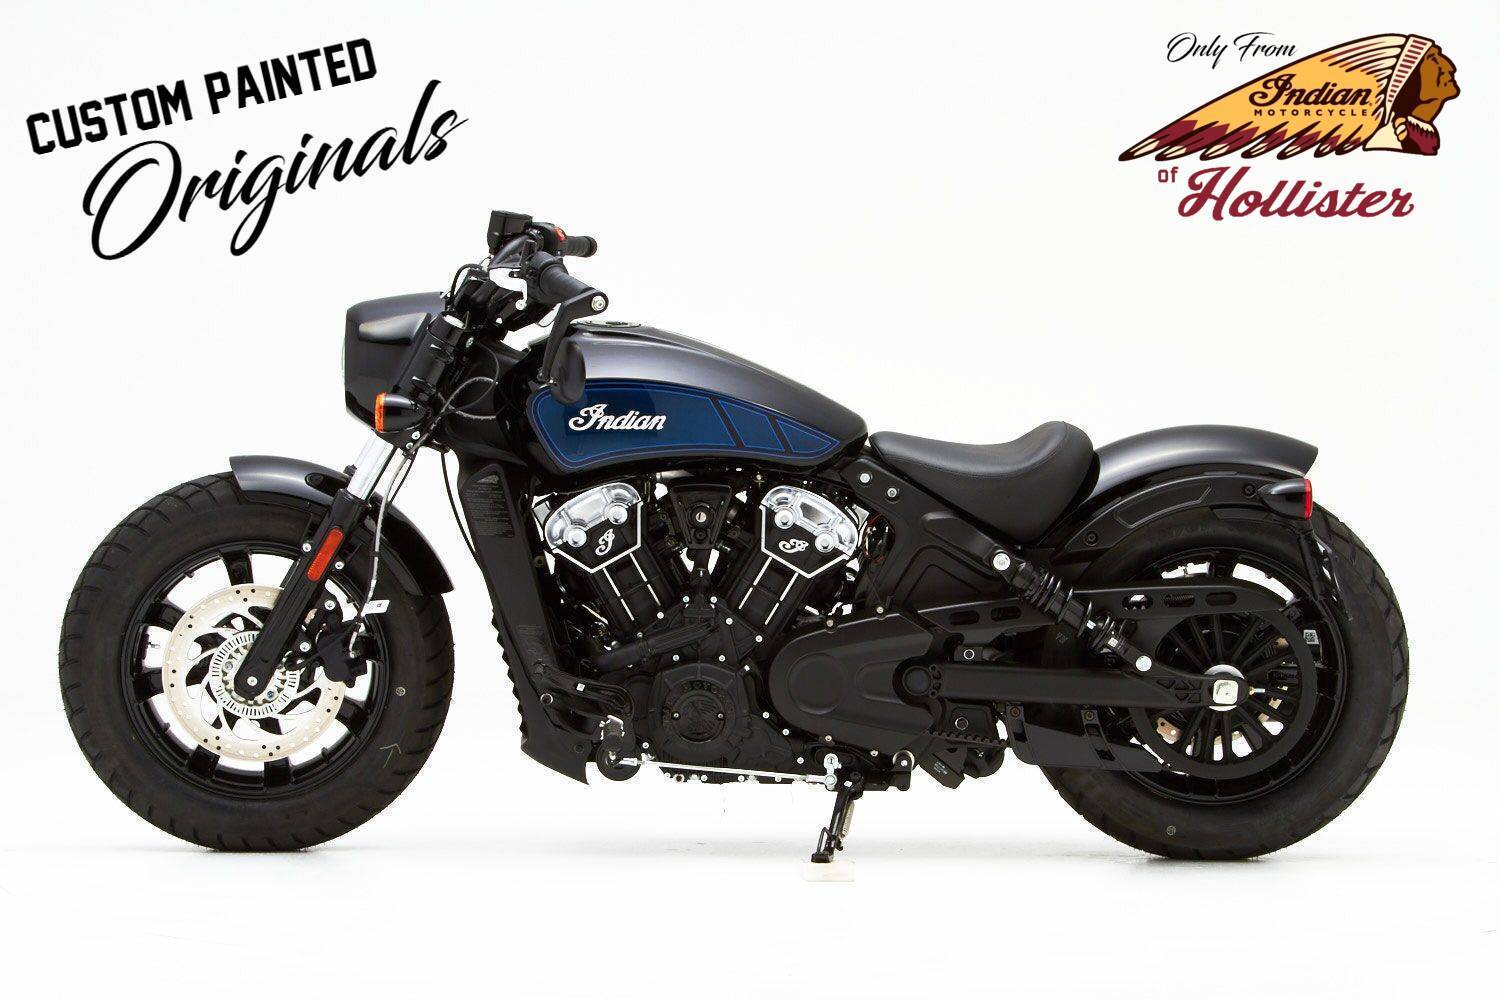 New 2020 Indian Scout® Bobber | Motorcycles in Hollister ...